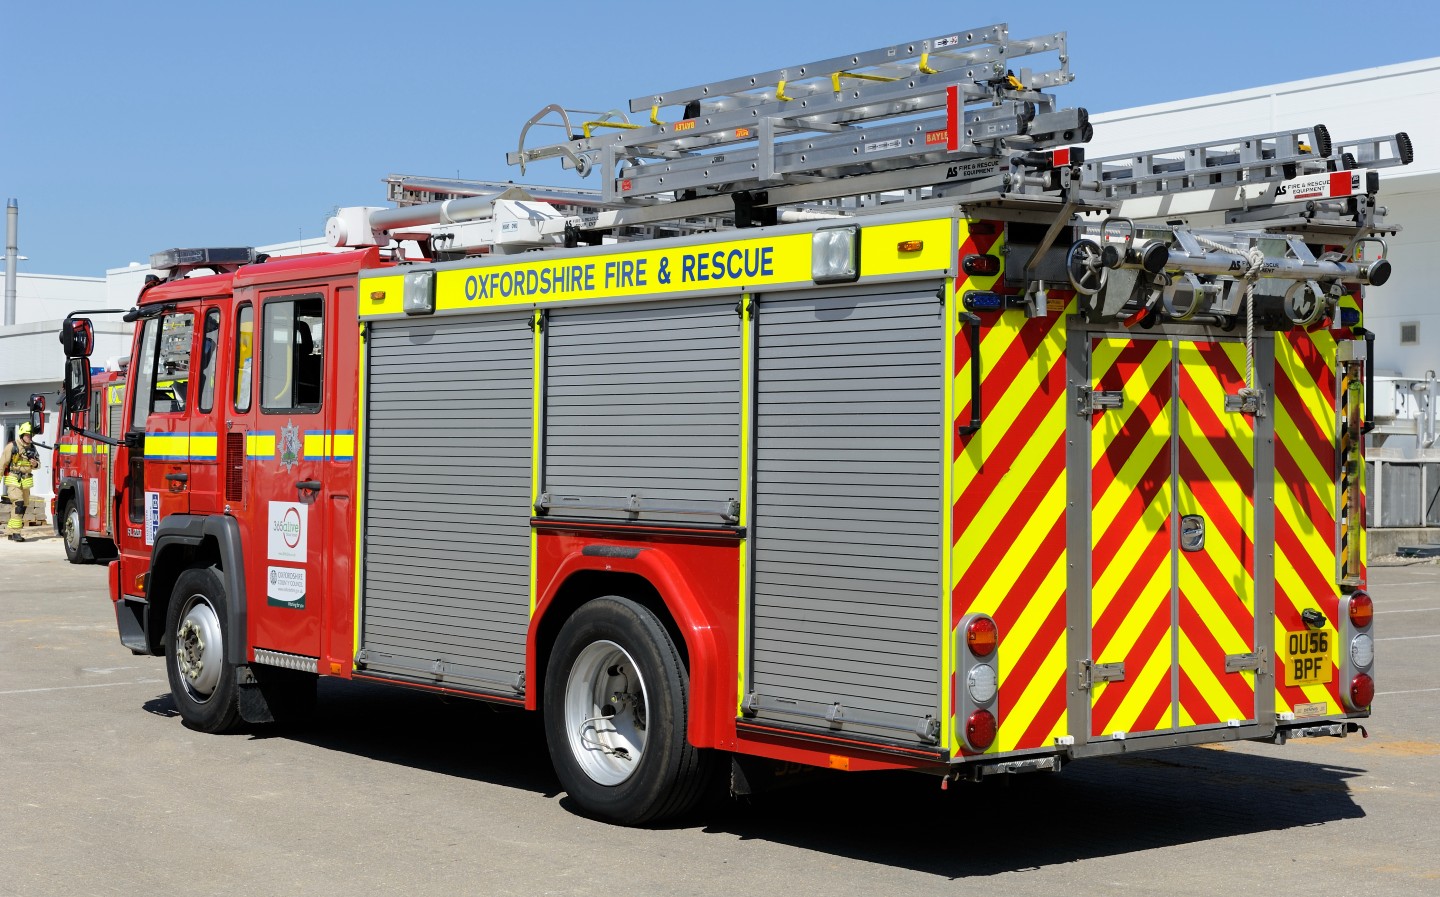 Research underway to look at hydrogen fuel cell power for Britain’s fire engines